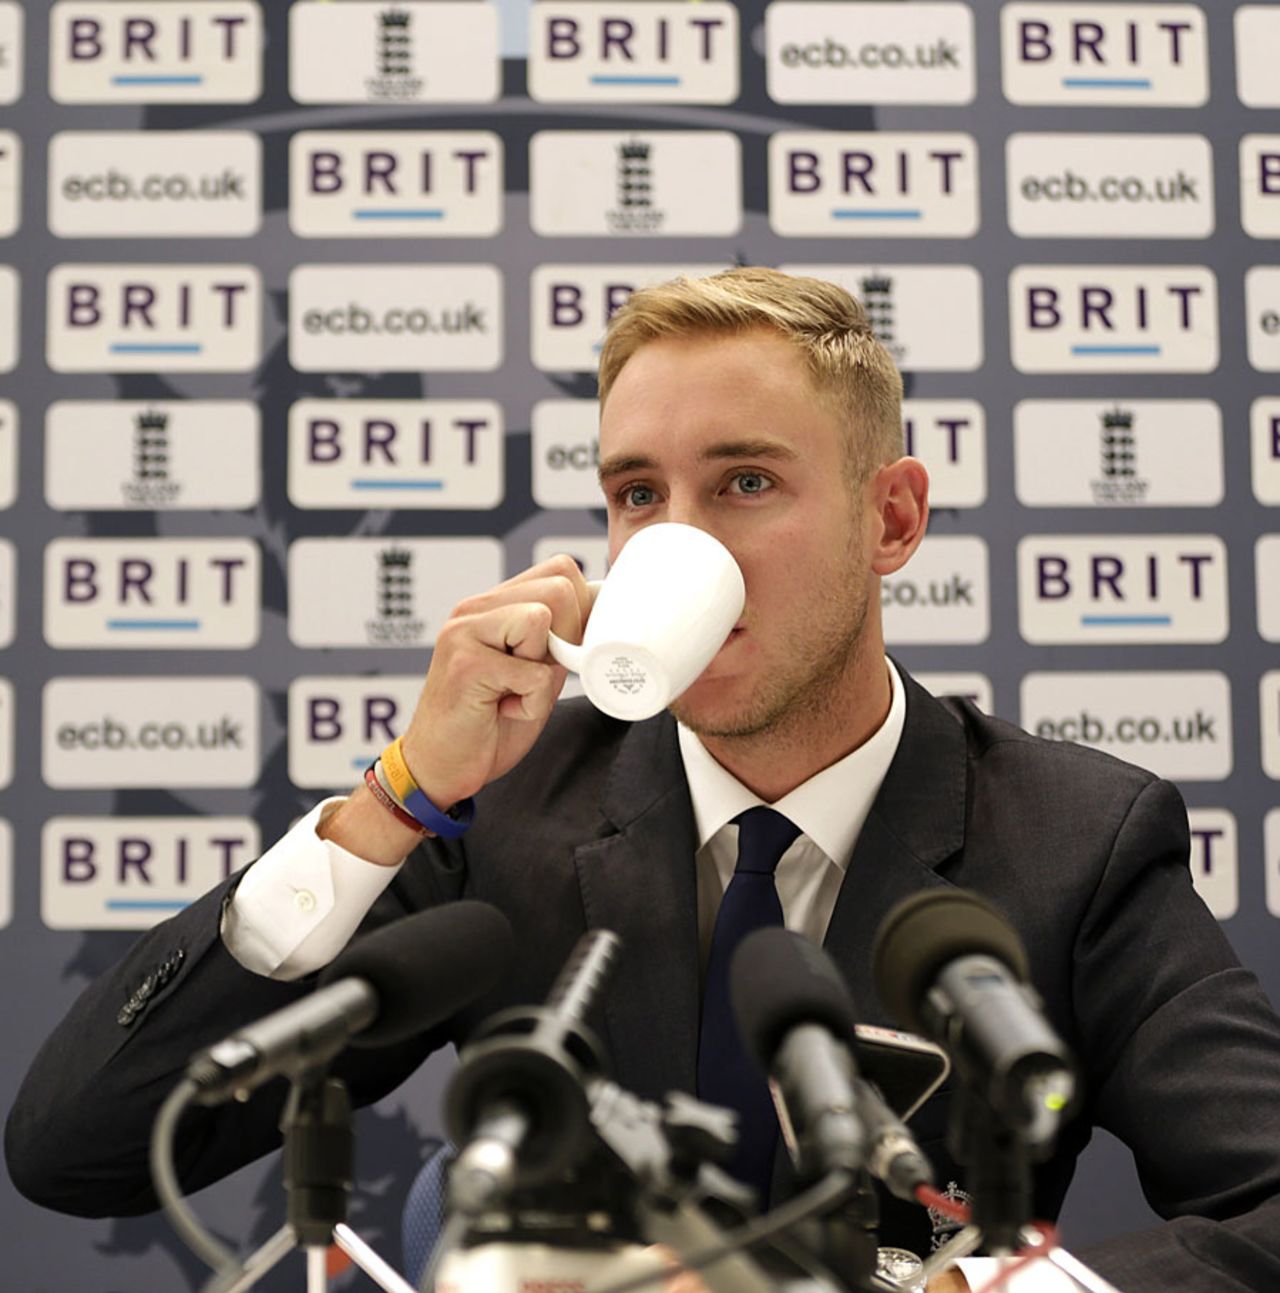 Stuart Broad attends a press conference before flying to West Indies, Gatwick, February 21, 2014